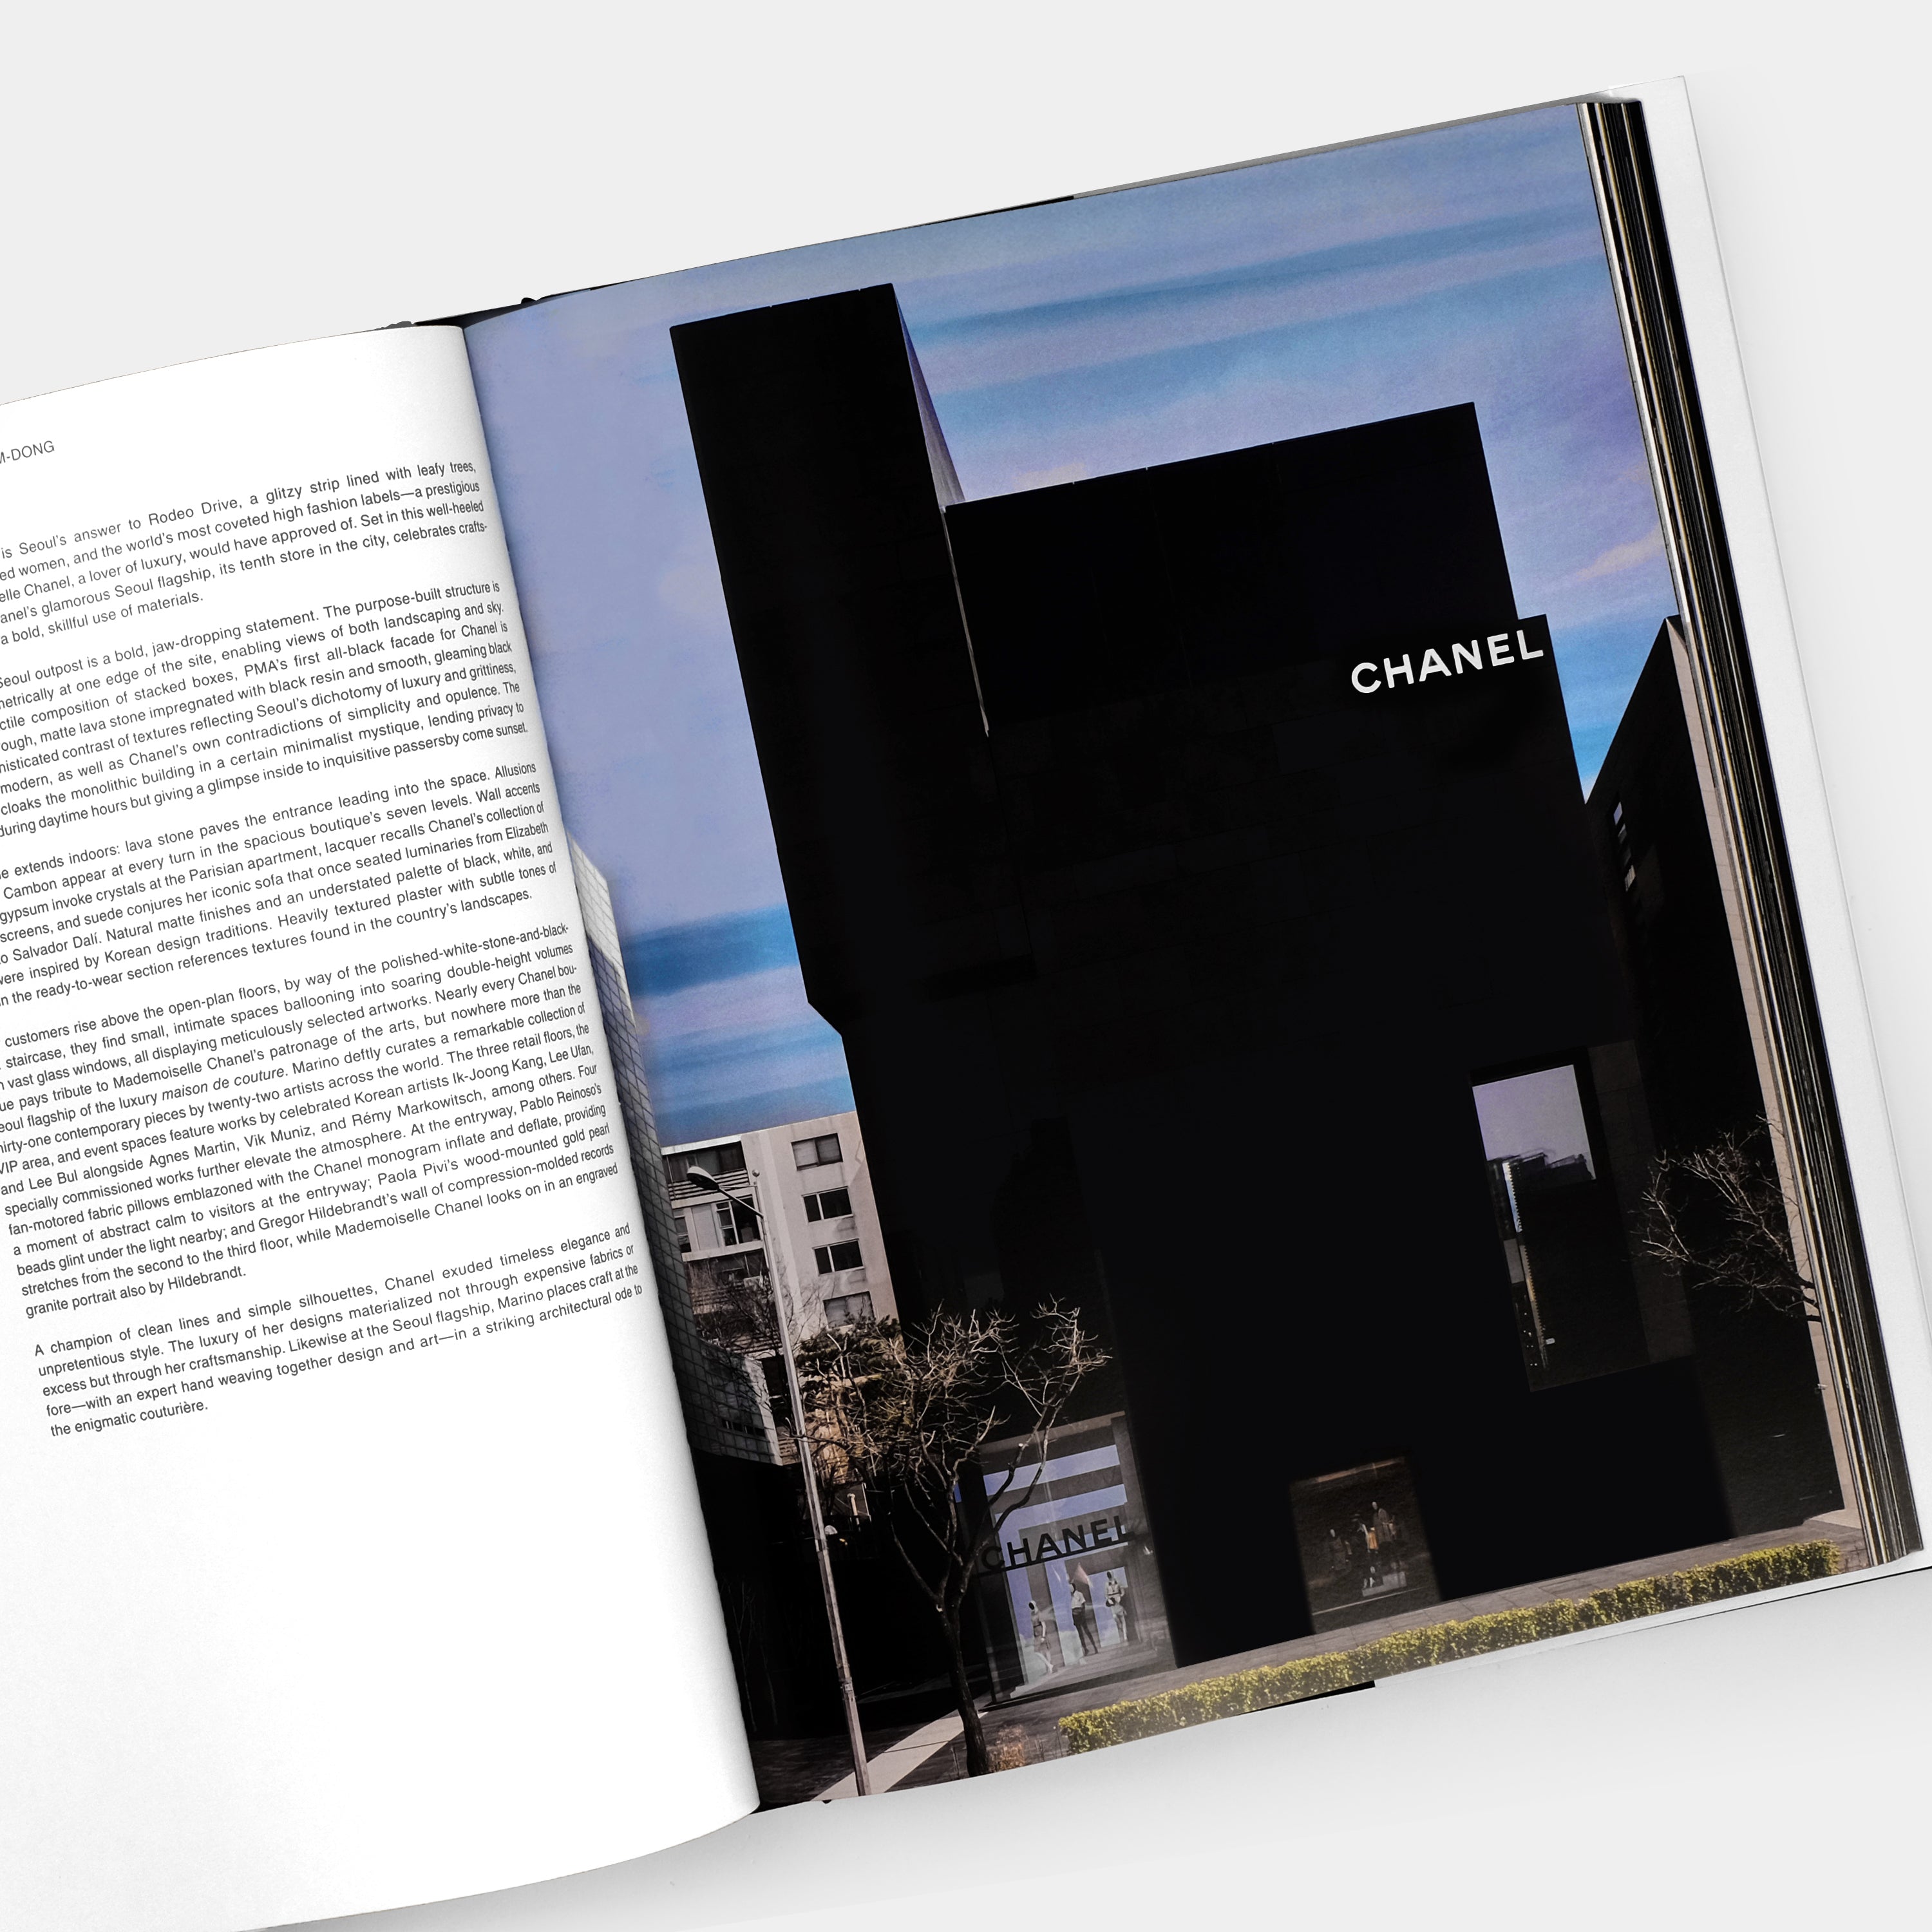 Peter Marino: The Architecture of Chanel Phaidon Book